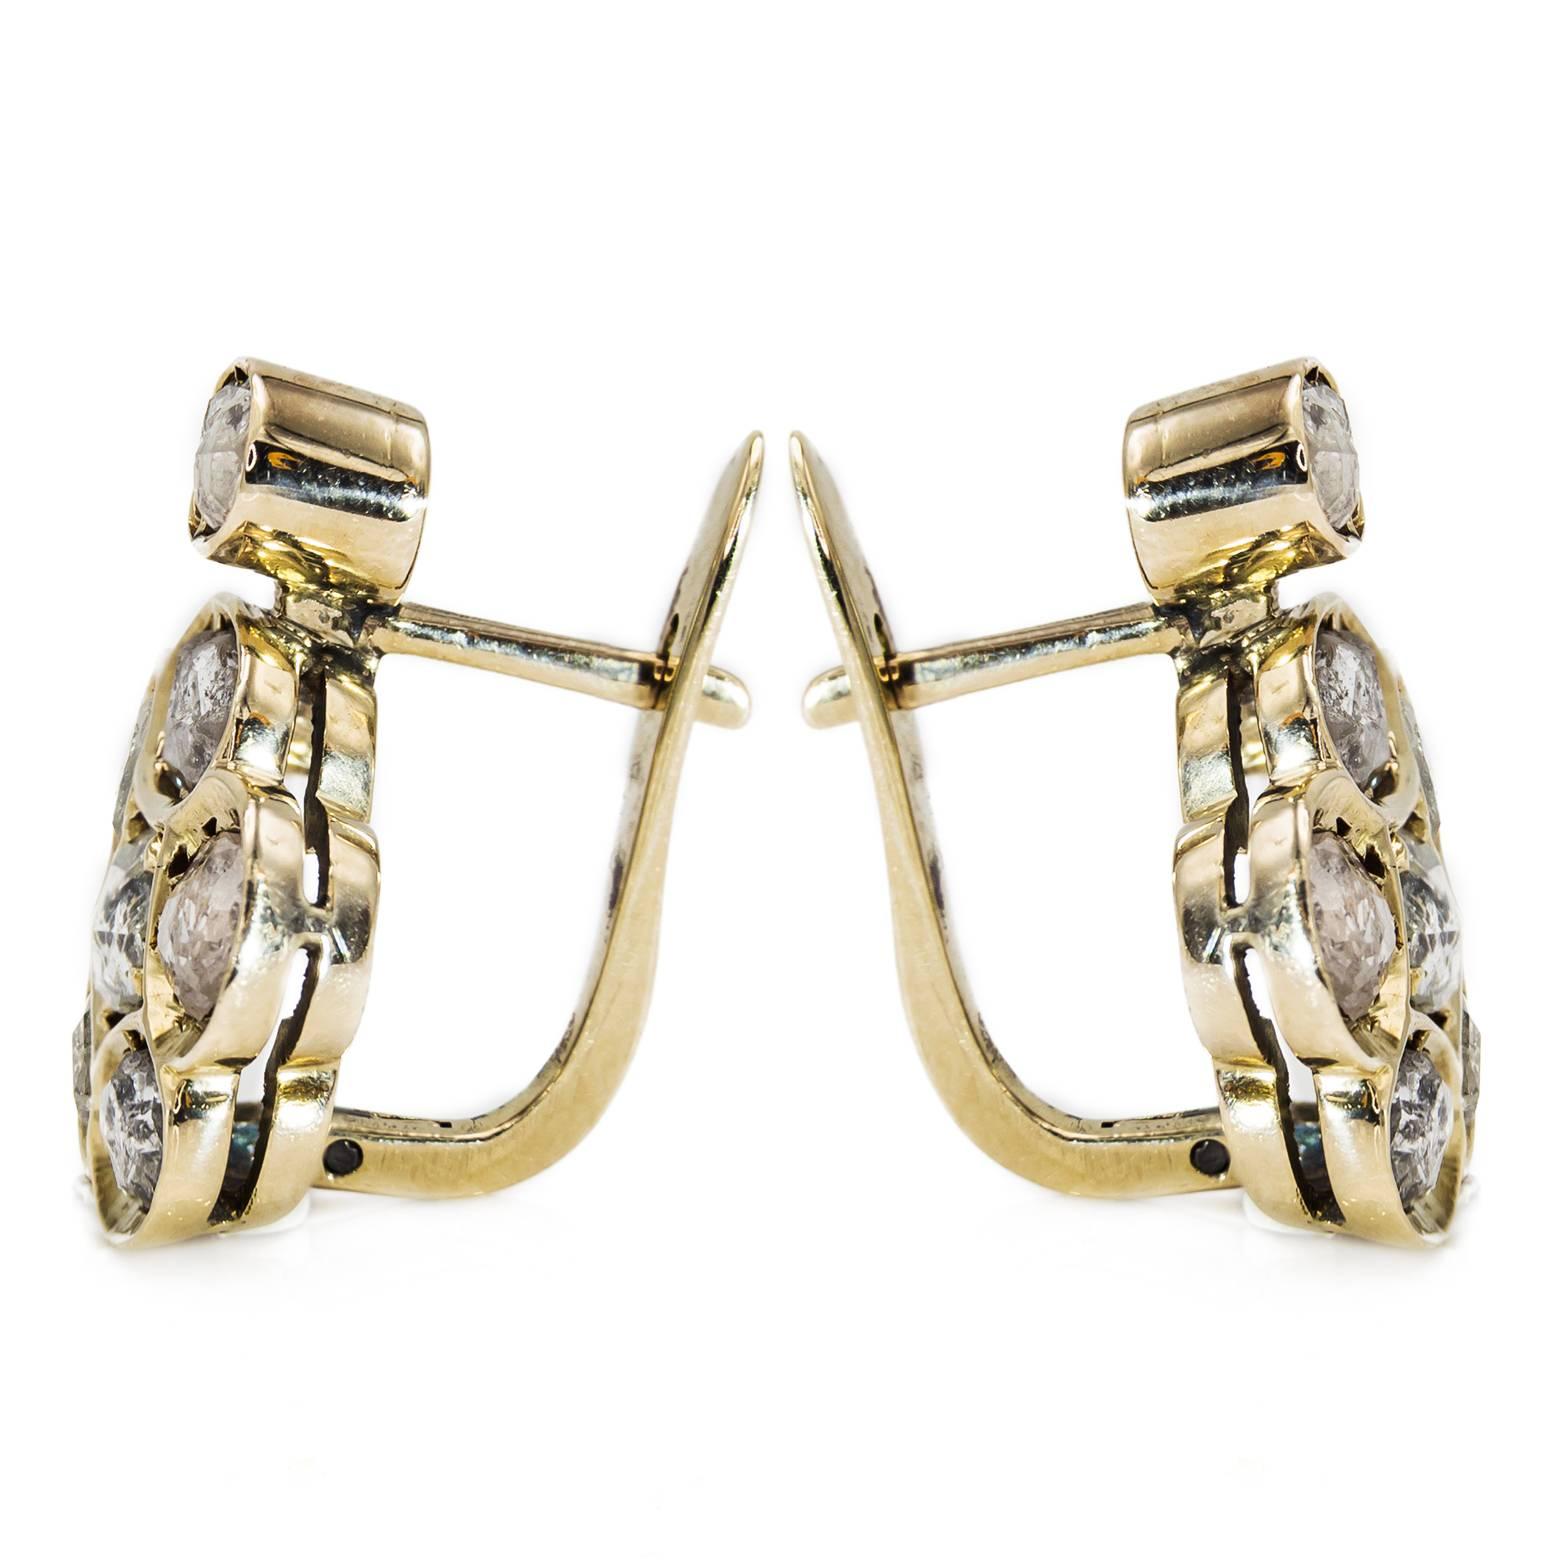 These gorgeous dazzling rose-cut diamond lever-back earrings are simply magnificent! Approximately 3.5 carats in total weight these beauties sparkle. Set in a beautiful shade of 12K Yellow gold where the bezel catches and reflects light and enhances